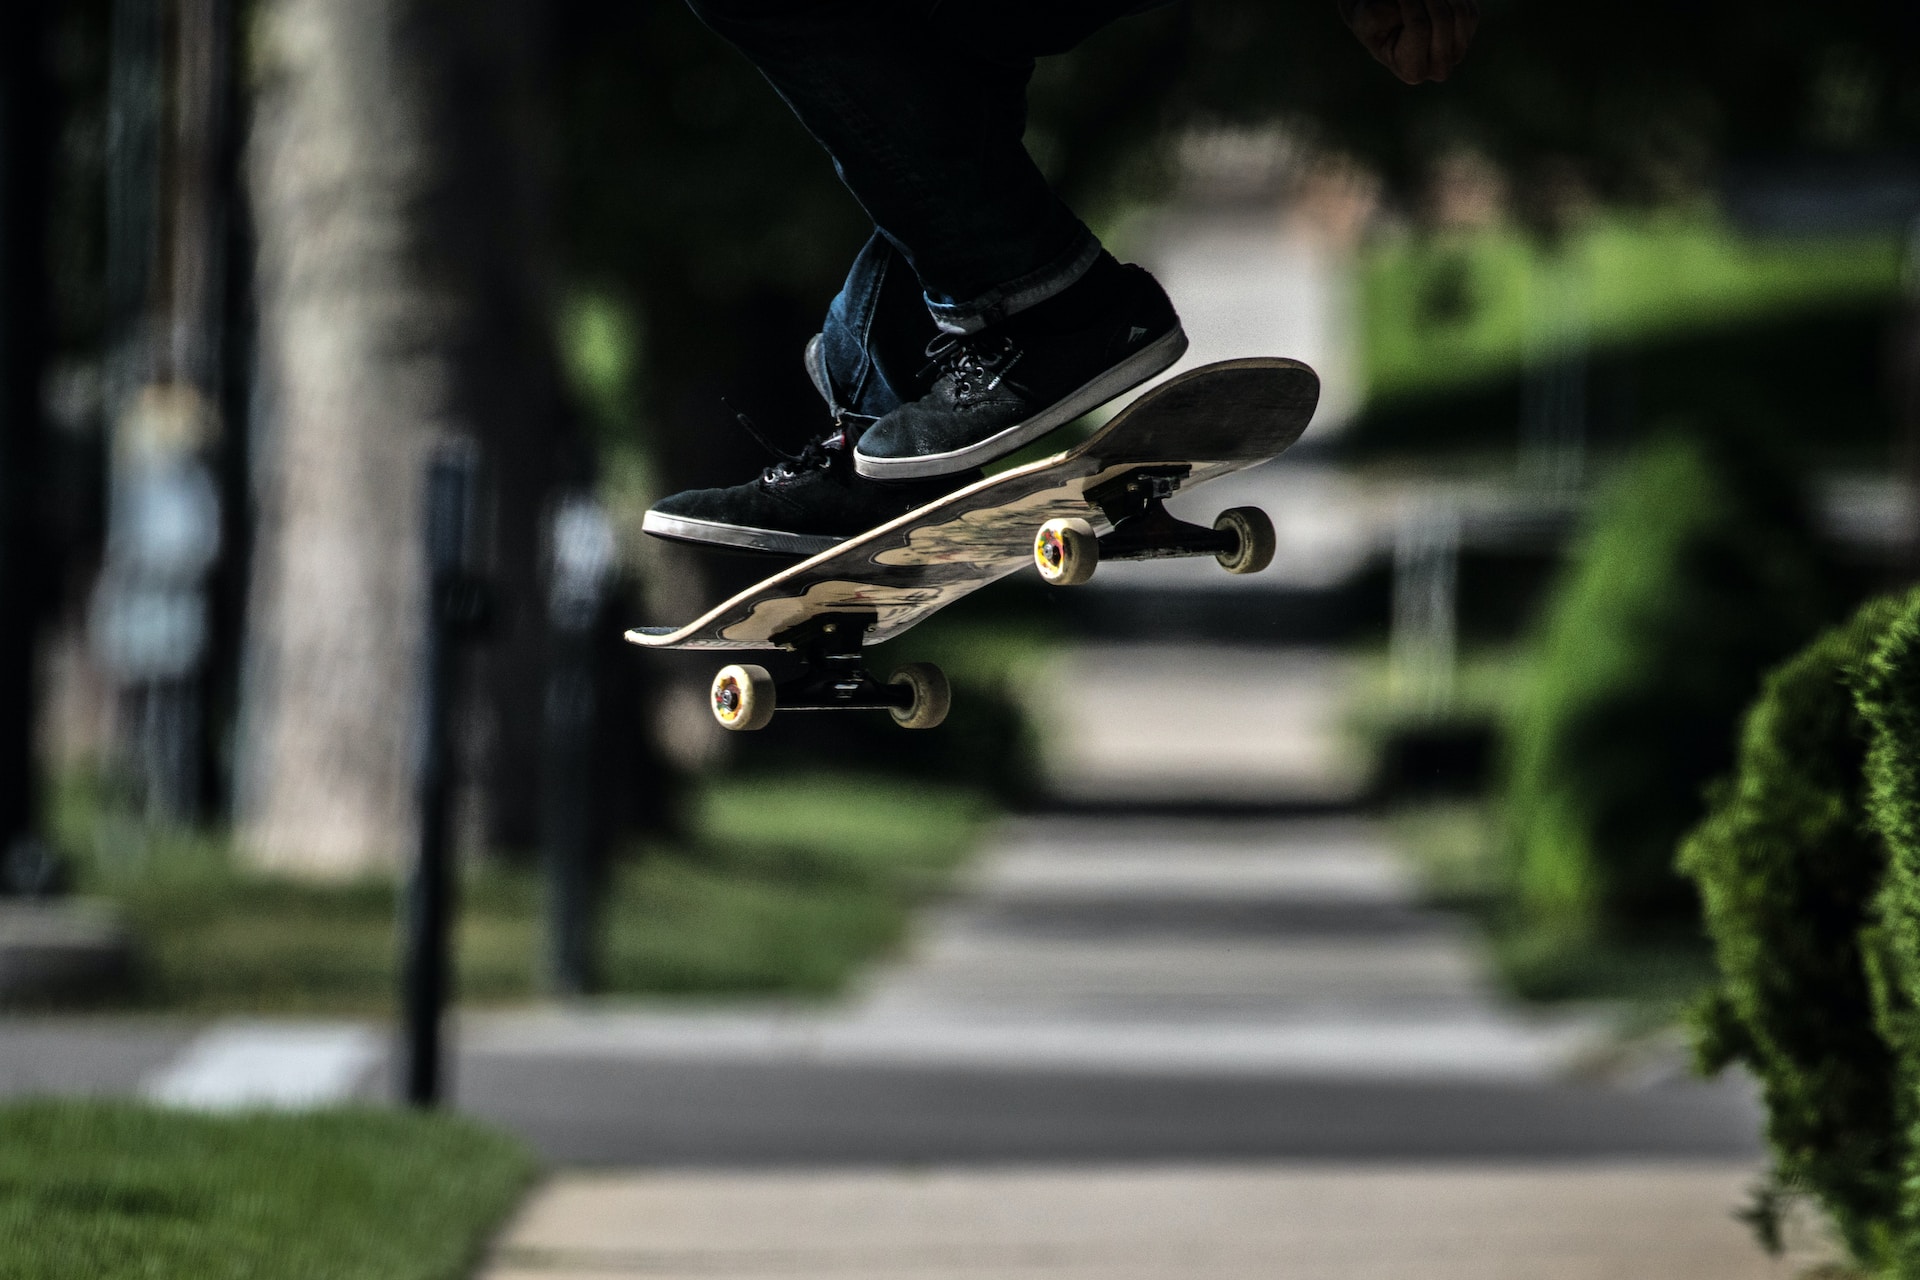 A skateboard in action